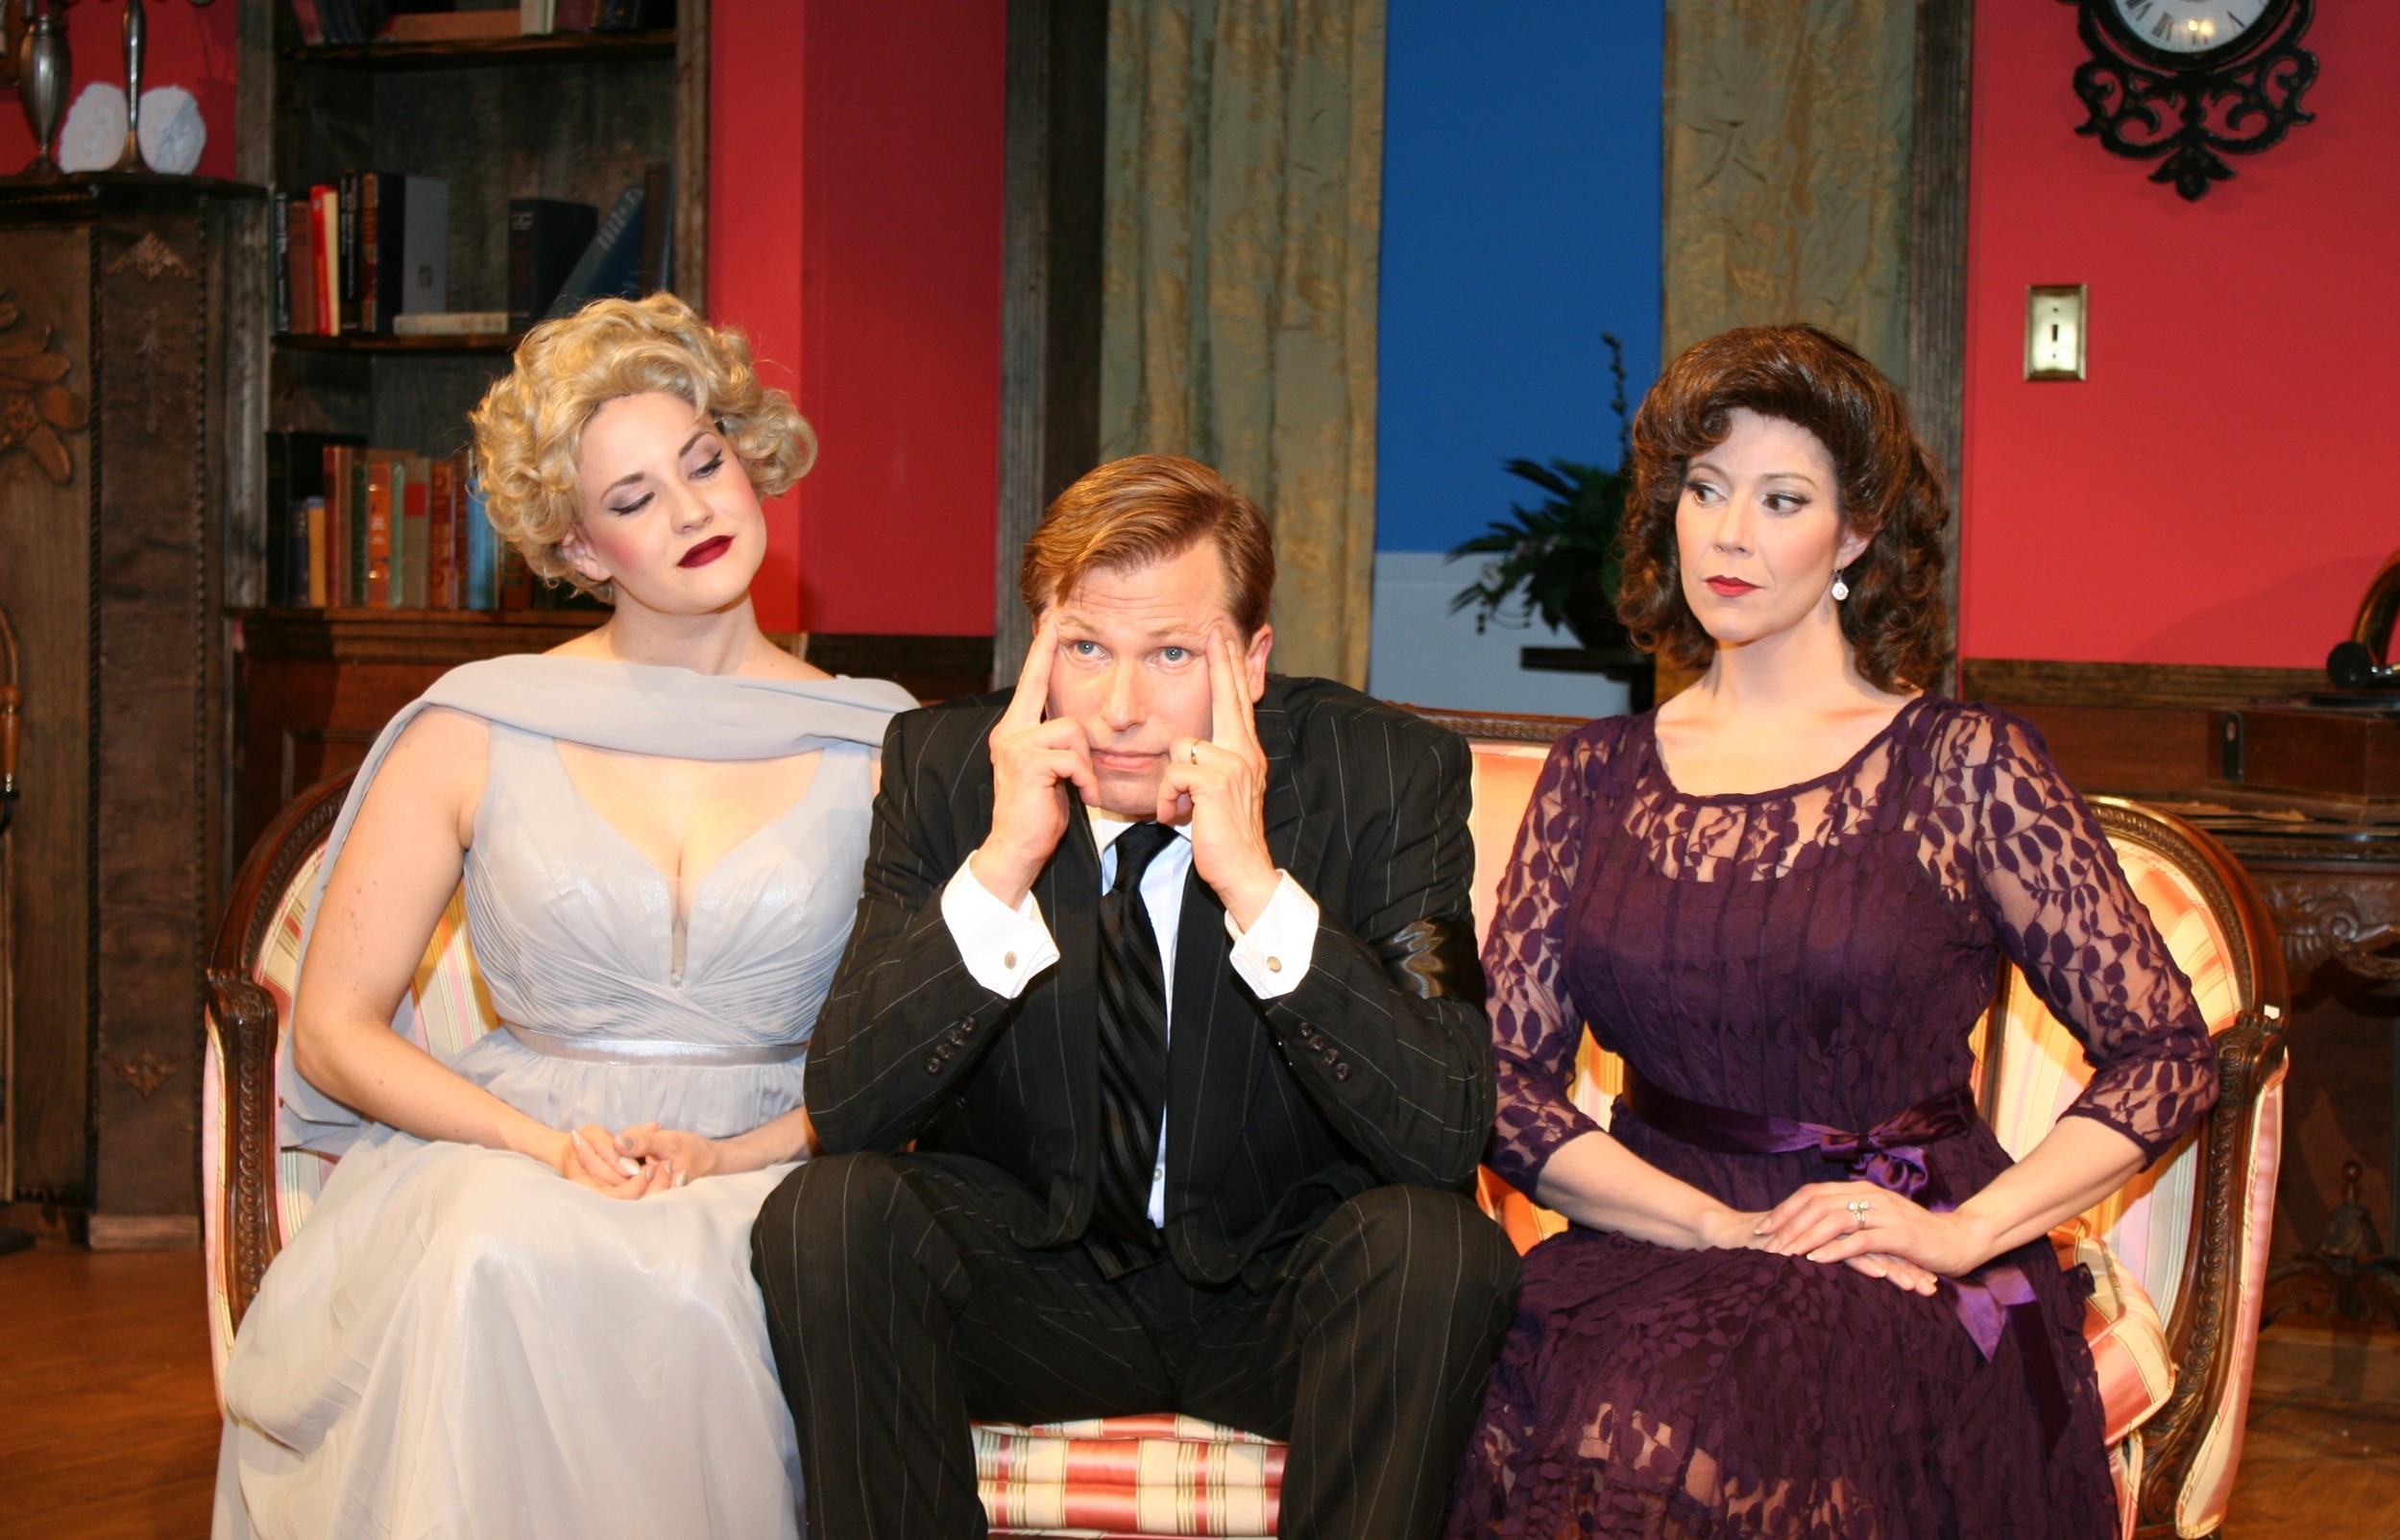 Charles Condomine (David Arrow) is caught in a supernatural love triangle with the ghost of late wife Elvira (Jessica Booth) and his second wife, Ruth, (Laura Hodos) in the Alhambra Theatre & Dining’s production of Noël Coward’s “Blithe Spirit.”